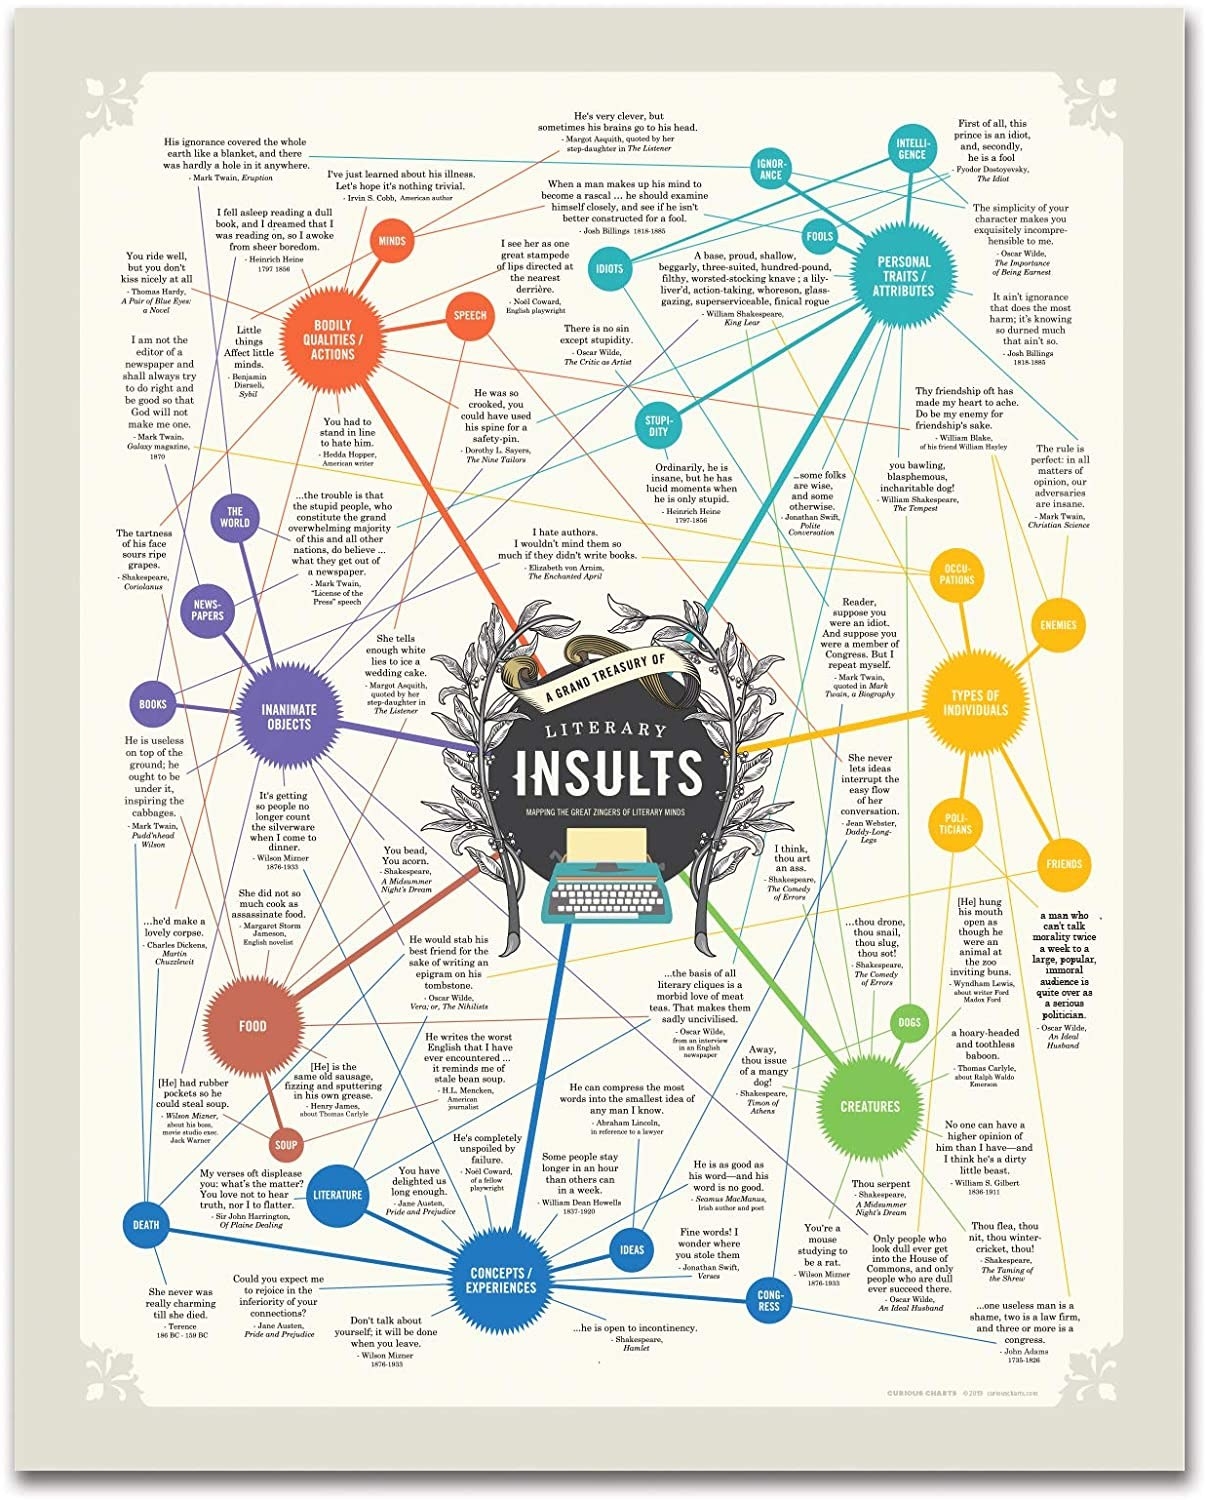 The poster with a sprawling chart of literary insults